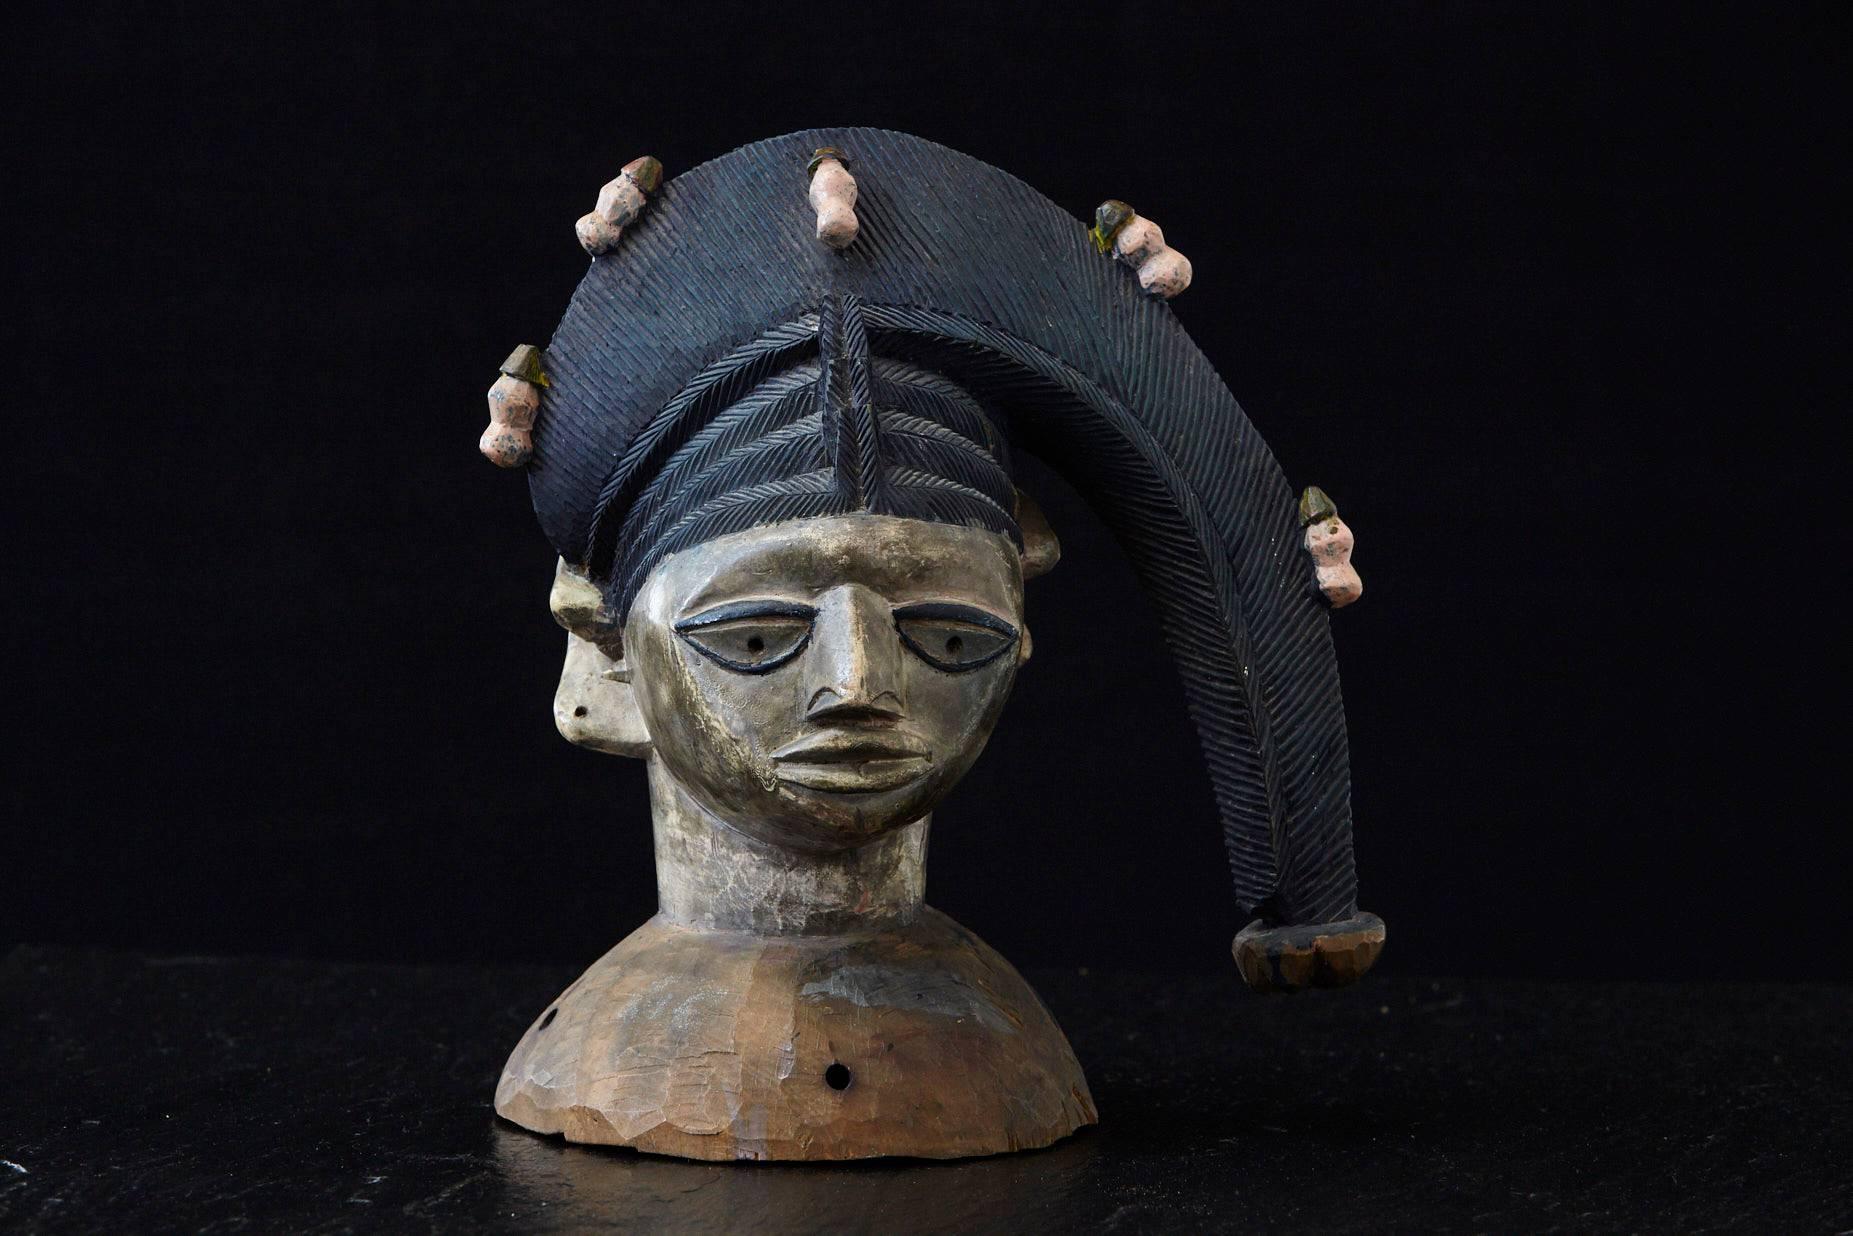 Polychrome Egungun Oyo headdress (ere egungun olode), Yoruba, Oyo State, Nigeria, circa 1930-1940, maybe earlier.
The headdress is elaborately carved from one piece of wood and colored with pigments.

While the style of carving varies widely